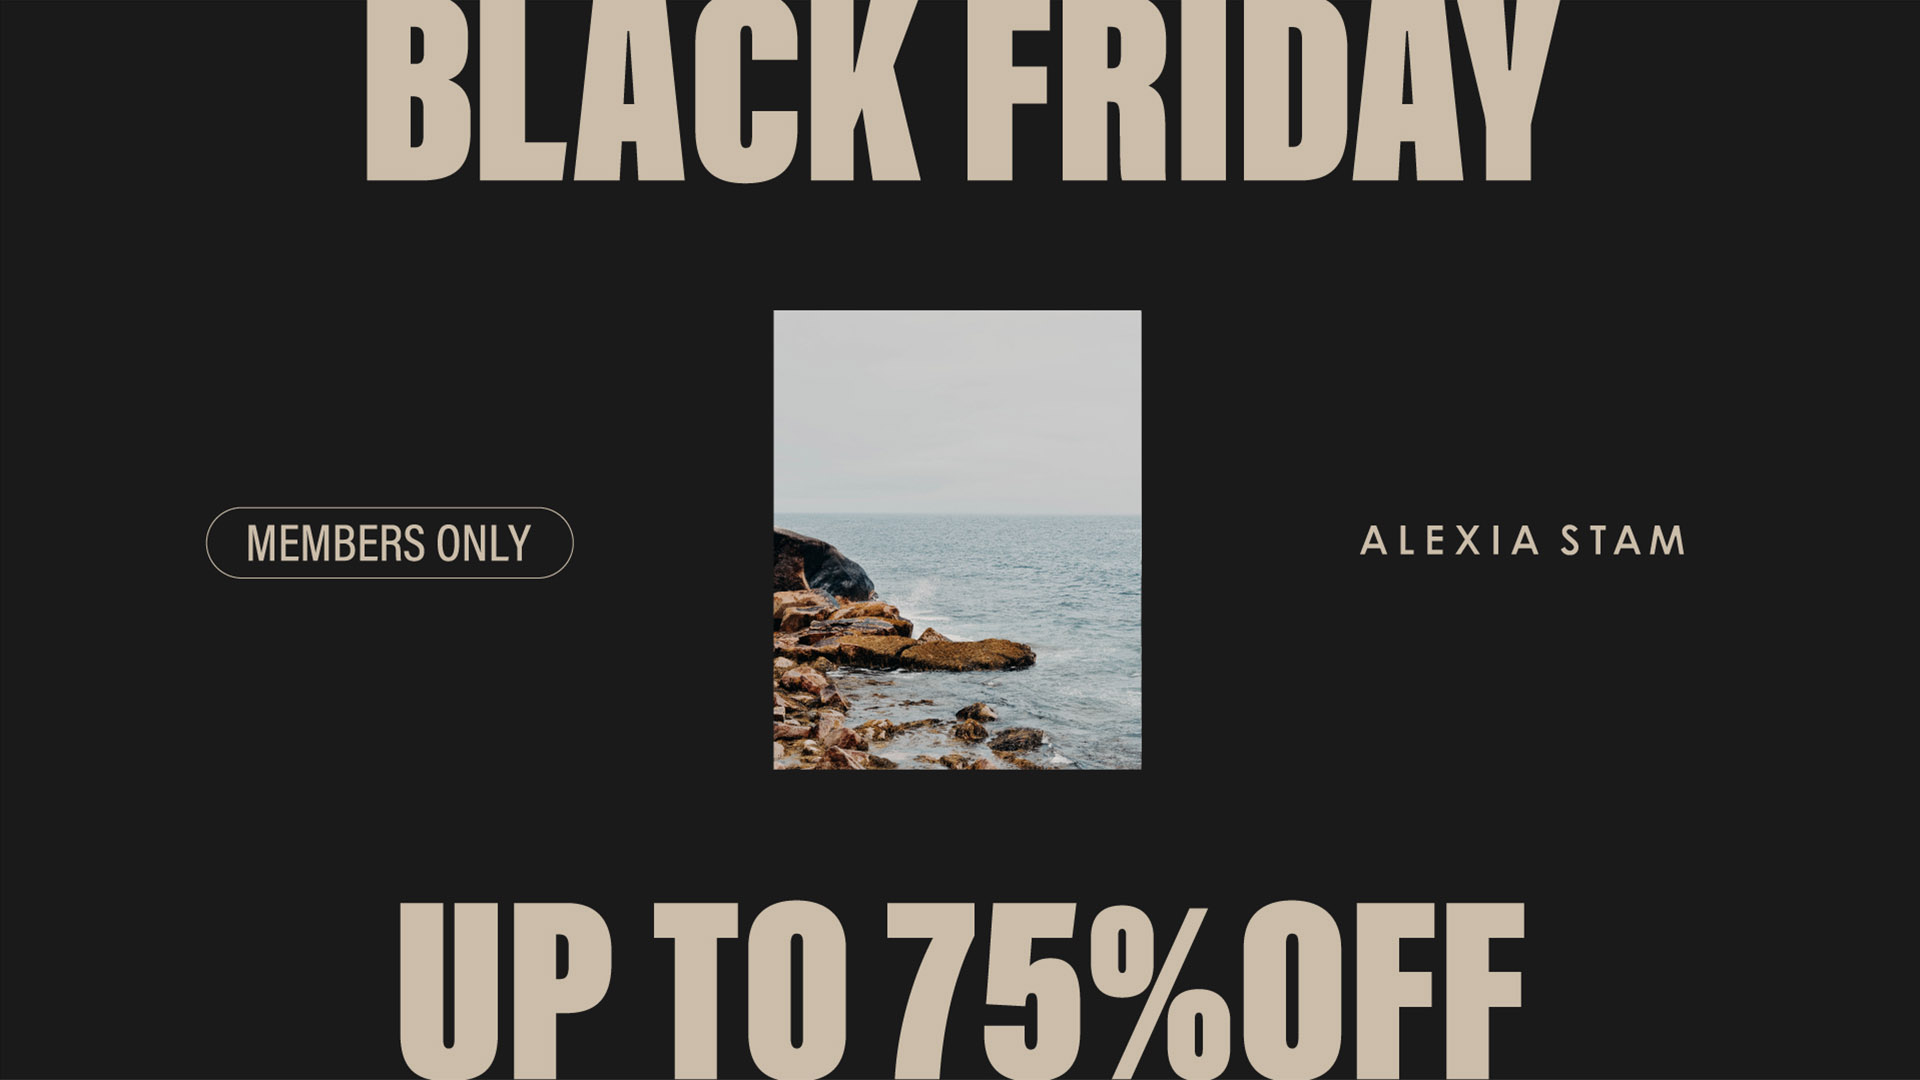 Black Friday SALE - Page 20 of 20 - ALEXIA STAM